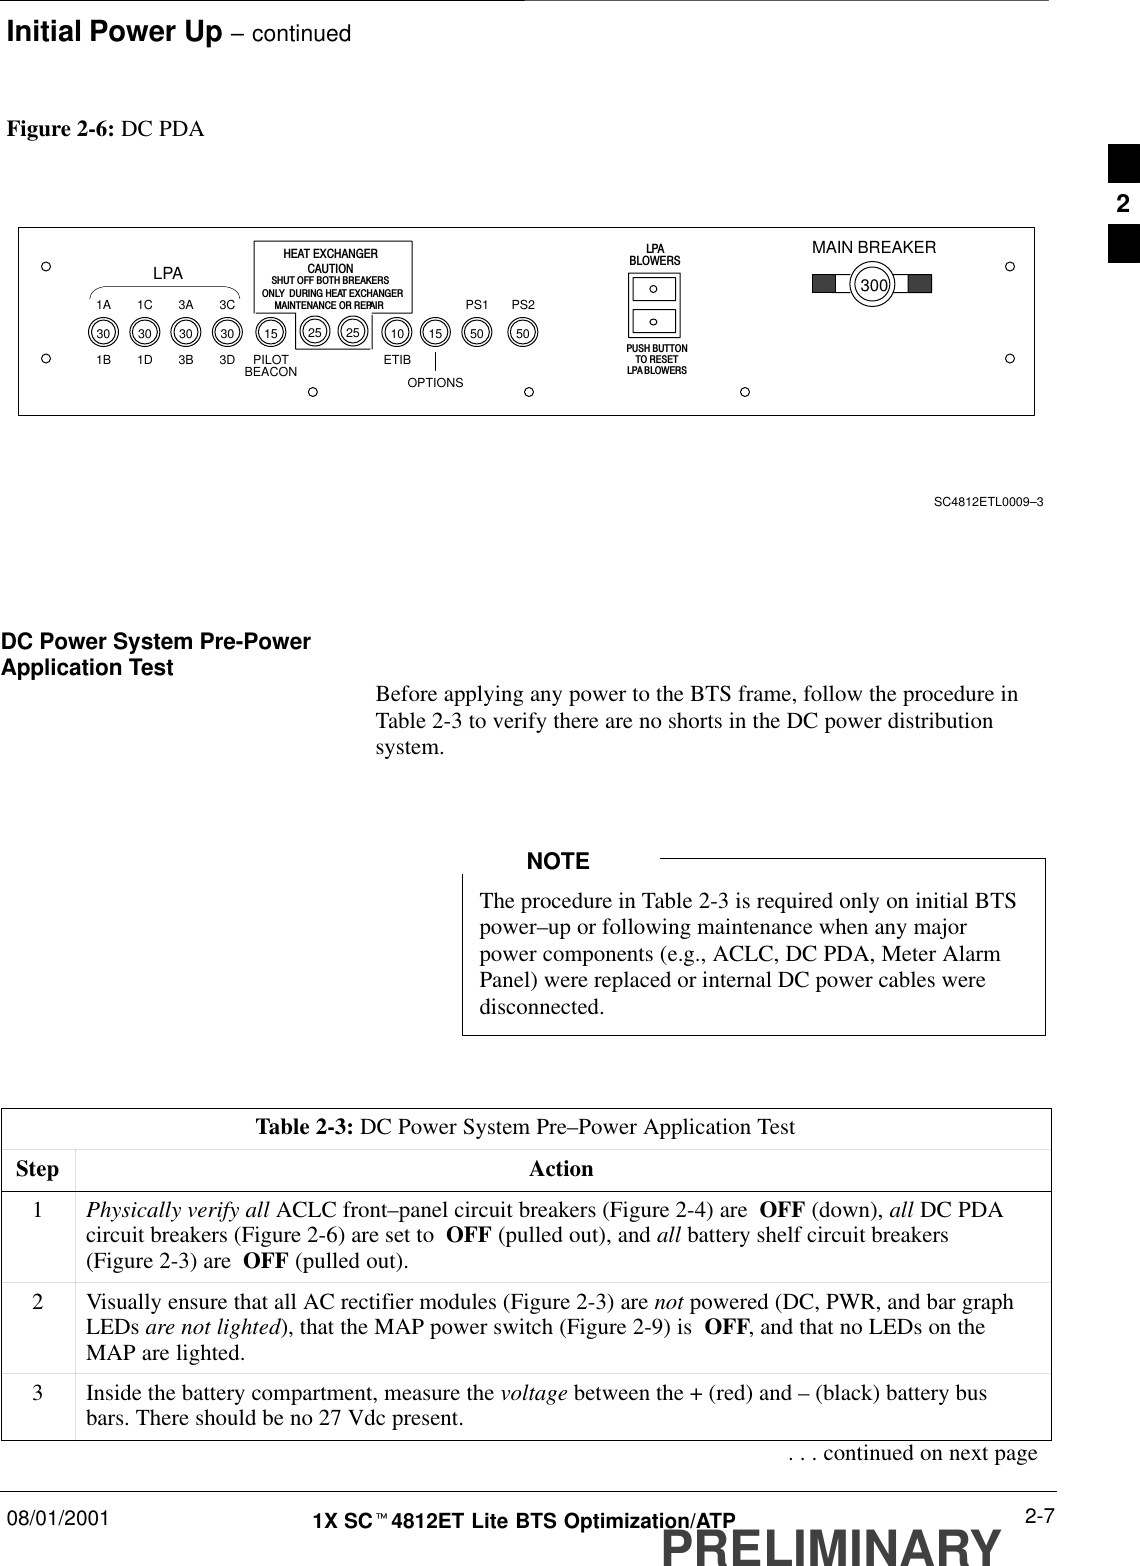 Initial Power Up – continued08/01/2001 2-71X SCt4812ET Lite BTS Optimization/ATPPRELIMINARYFigure 2-6: DC PDASC4812ETL0009–3LPA1B 1D 3B 3D1A 1C 3A 3C PS1 PS2ETIBOPTIONS25 25HEAT EXCHANGERCAUTIONSHUT OFF BOTH BREAKERSONLY  DURING HEAT EXCHANGERMAINTENANCE OR REPAIRLPABLOWERSPUSH BUTTONTO RESETLPA BLOWERSMAIN BREAKER30050 5010 1530 30 30 30 15PILOTBEACONDC Power System Pre-PowerApplication Test Before applying any power to the BTS frame, follow the procedure inTable 2-3 to verify there are no shorts in the DC power distributionsystem.The procedure in Table 2-3 is required only on initial BTSpower–up or following maintenance when any majorpower components (e.g., ACLC, DC PDA, Meter AlarmPanel) were replaced or internal DC power cables weredisconnected.NOTETable 2-3: DC Power System Pre–Power Application TestStep Action1Physically verify all ACLC front–panel circuit breakers (Figure 2-4) are  OFF (down), all DC PDAcircuit breakers (Figure 2-6) are set to  OFF (pulled out), and all battery shelf circuit breakers(Figure 2-3) are  OFF (pulled out).2Visually ensure that all AC rectifier modules (Figure 2-3) are not powered (DC, PWR, and bar graphLEDs are not lighted), that the MAP power switch (Figure 2-9) is  OFF, and that no LEDs on theMAP are lighted.3Inside the battery compartment, measure the voltage between the + (red) and – (black) battery busbars. There should be no 27 Vdc present.. . . continued on next page2